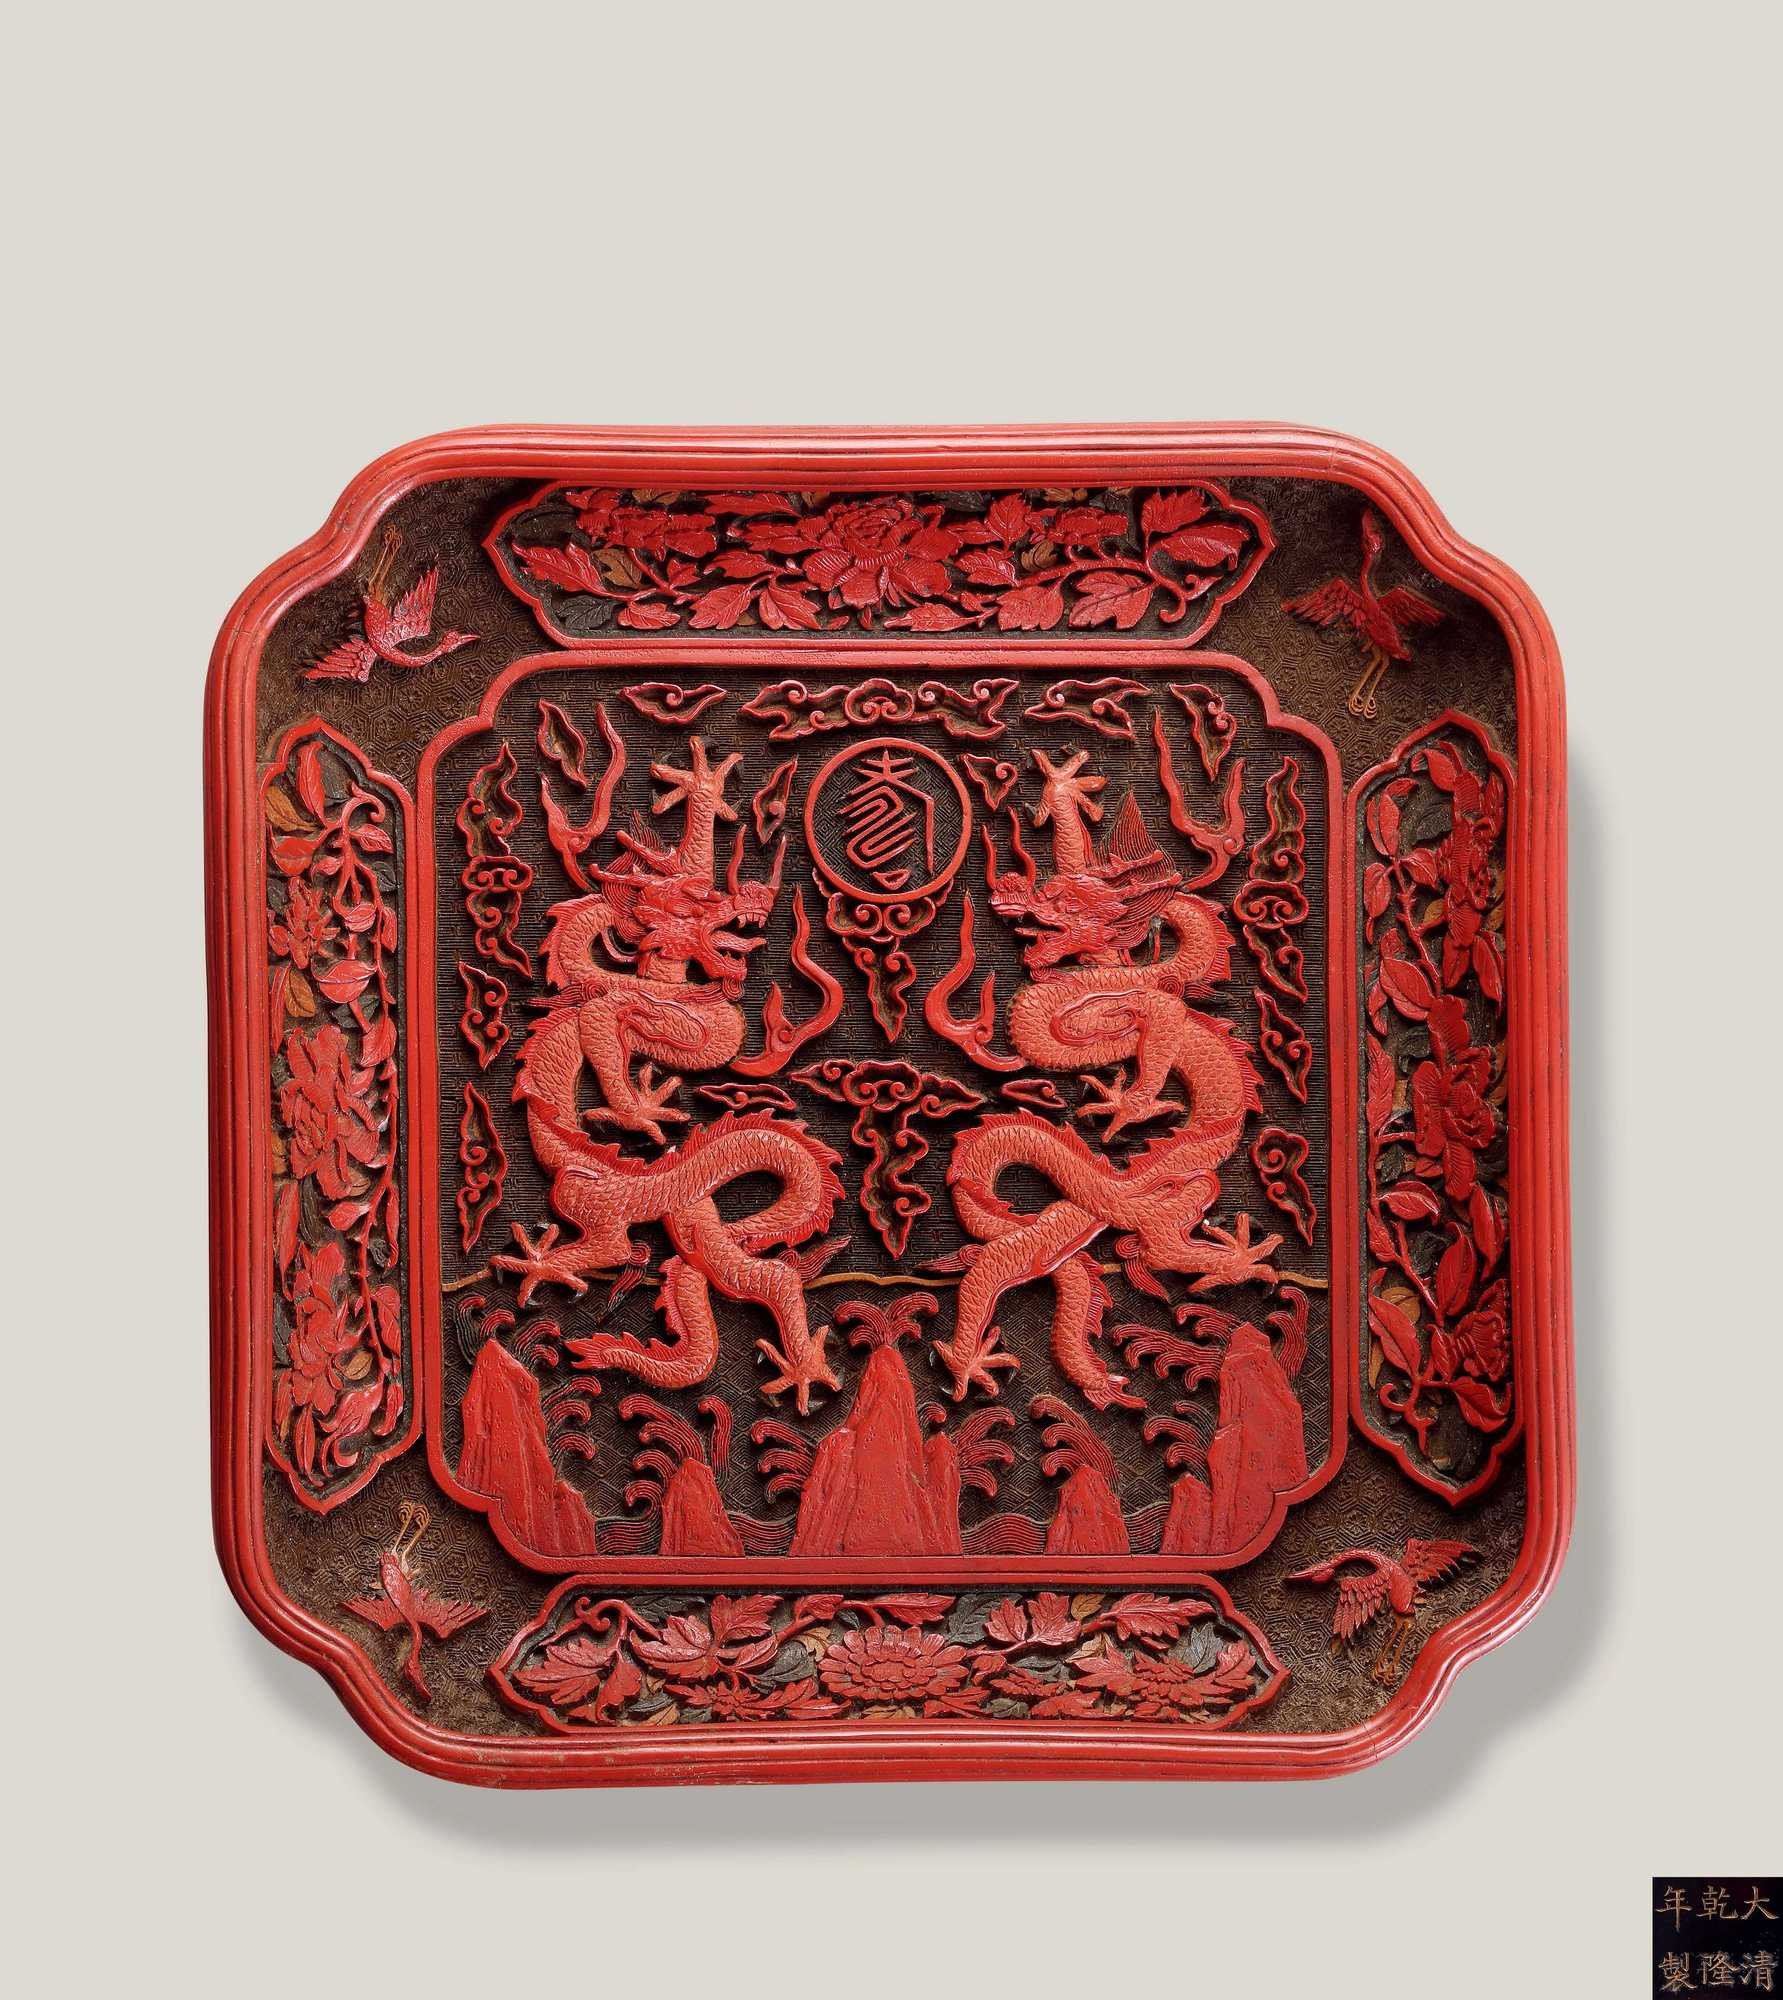 A RARE CARVED LACQUER‘DRAGON AND LONGEVITY’BOX AND COVER